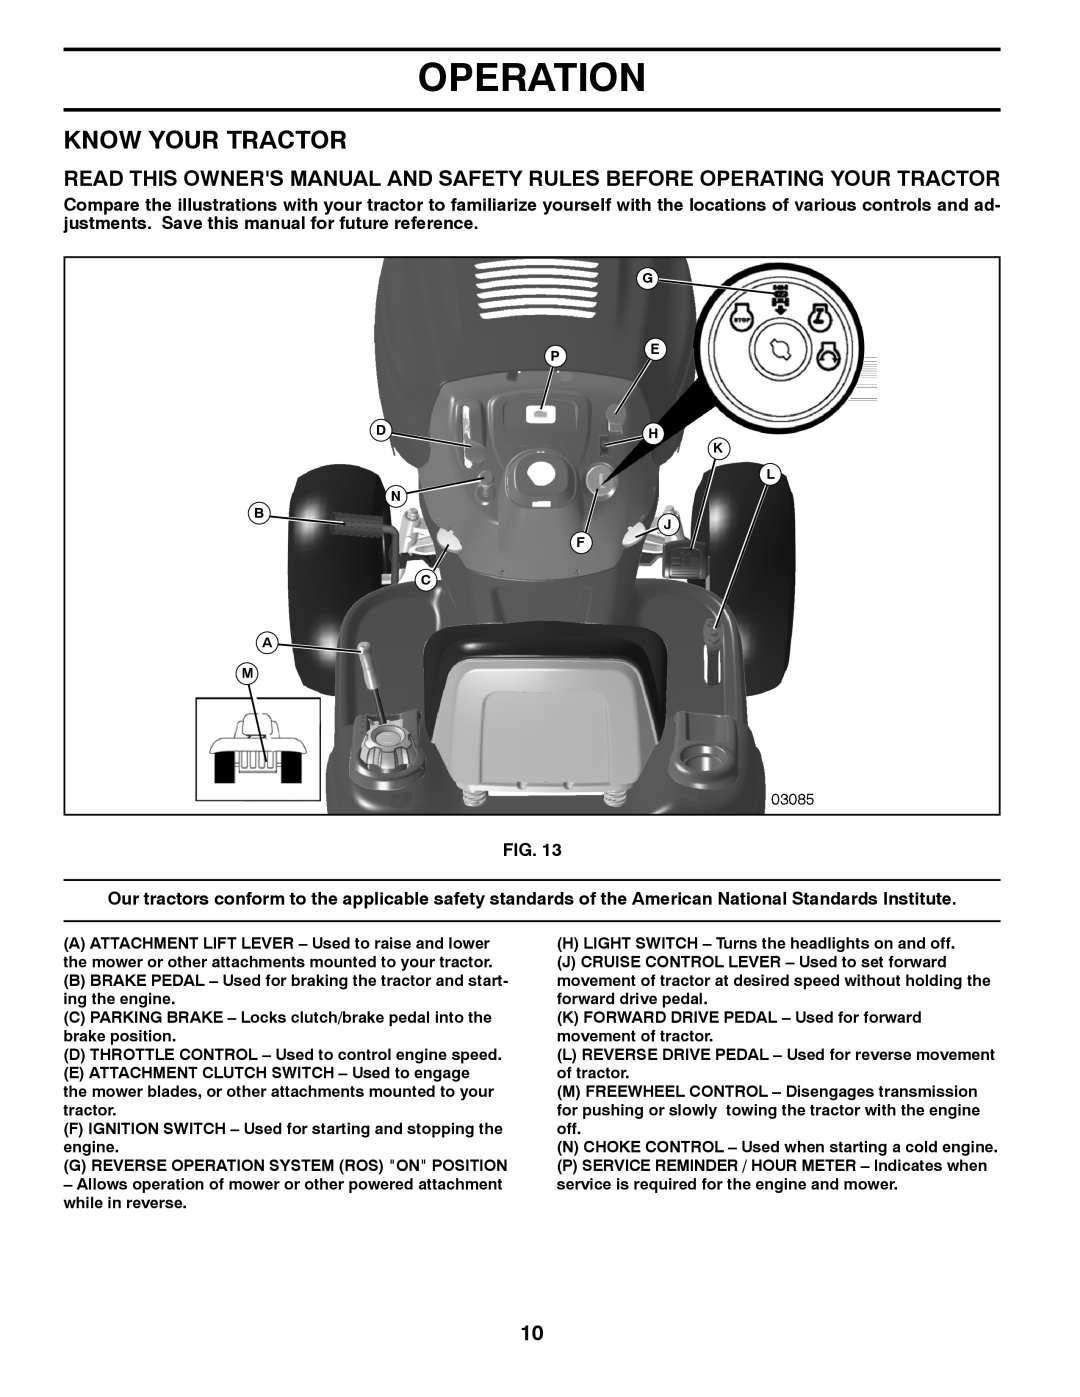 Poulan 417920 manual Know Your Tractor, Operation 